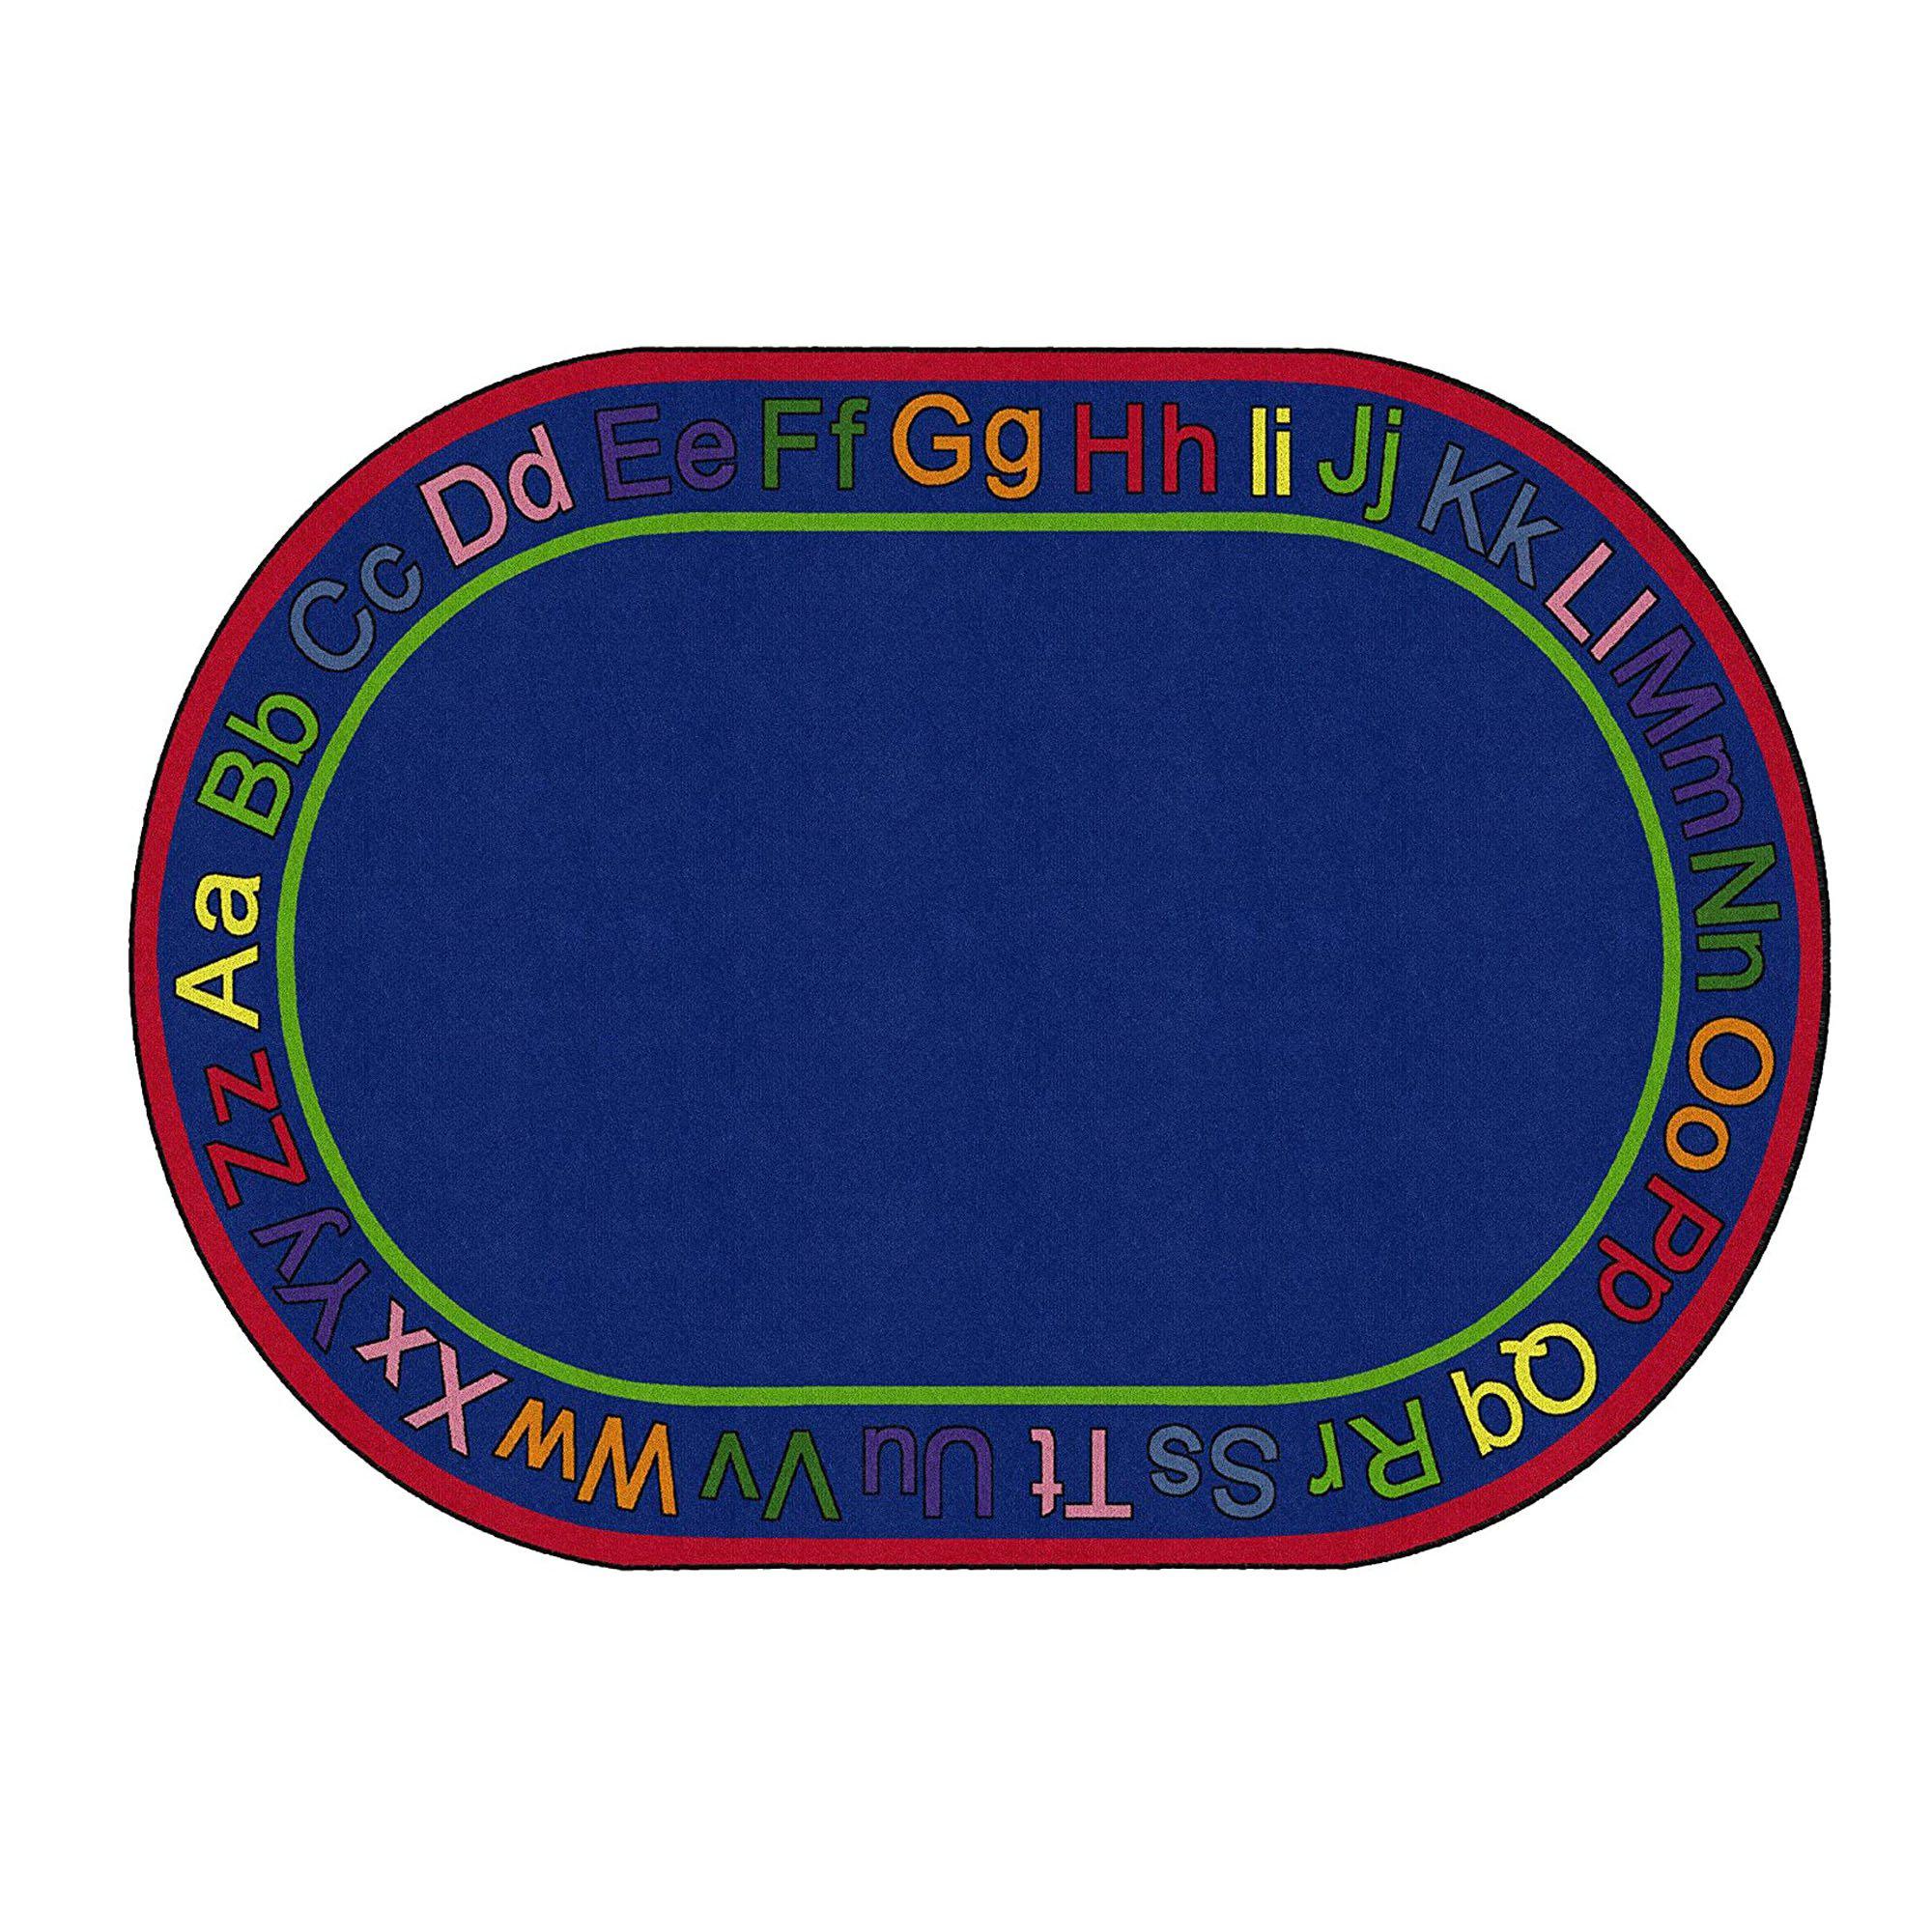 Know Your ABC's Rug, Oval, 7' 6" x 12'